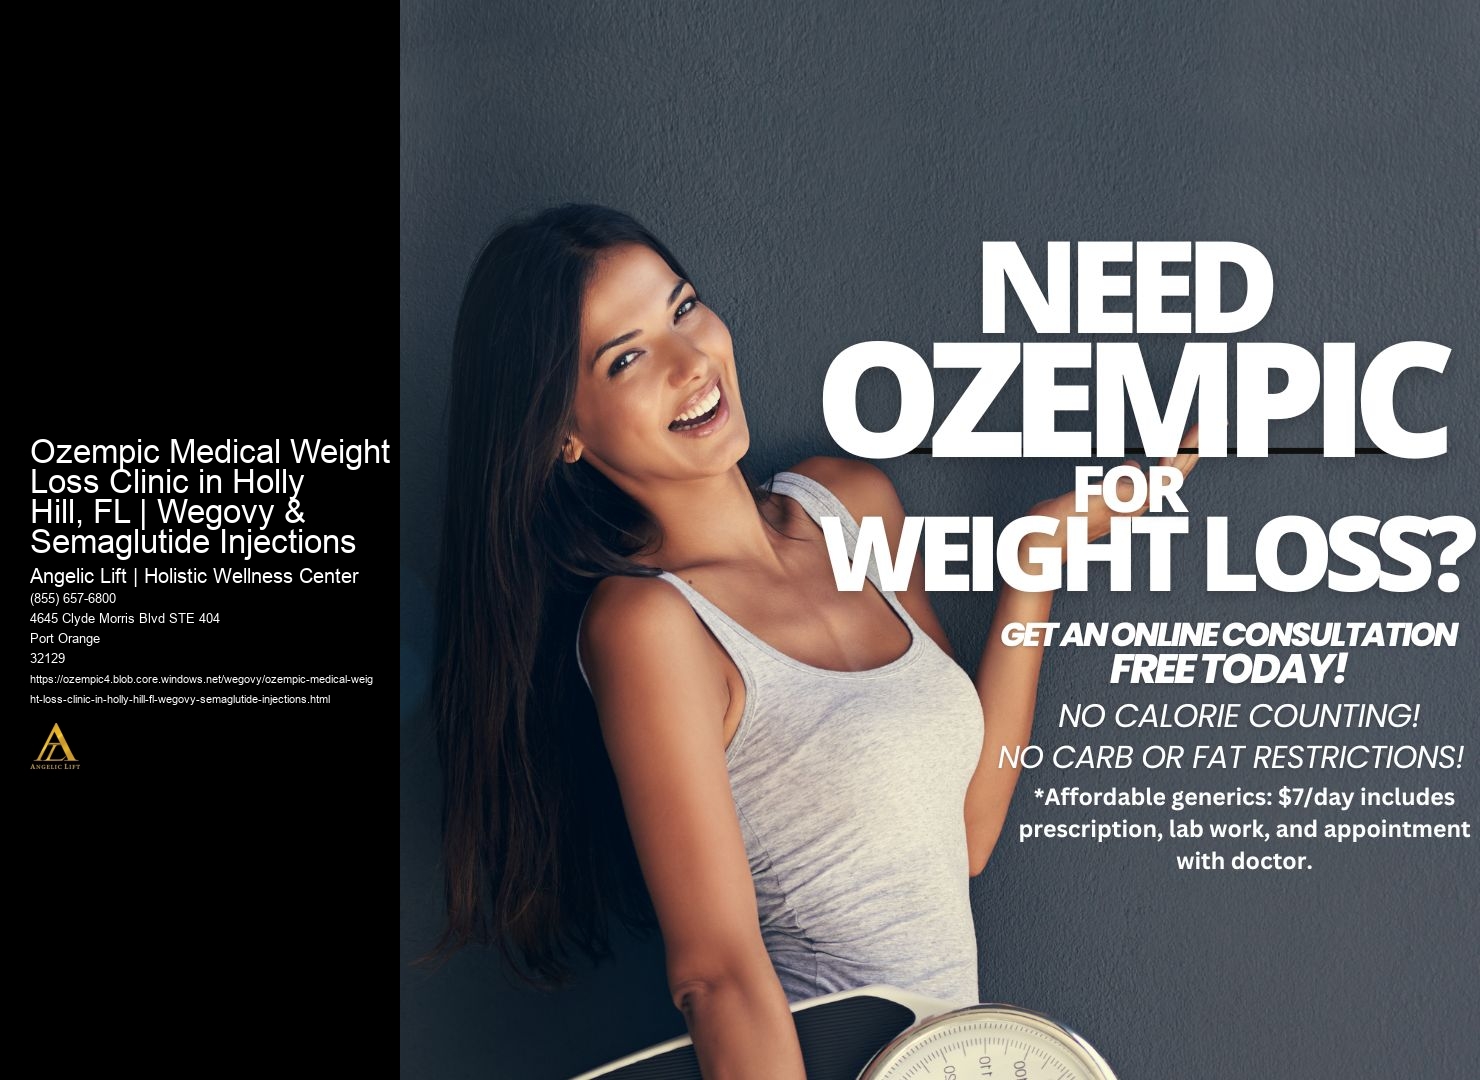 Ozempic Medical Weight Loss Clinic in Holly Hill, FL | Wegovy & Semaglutide Injections